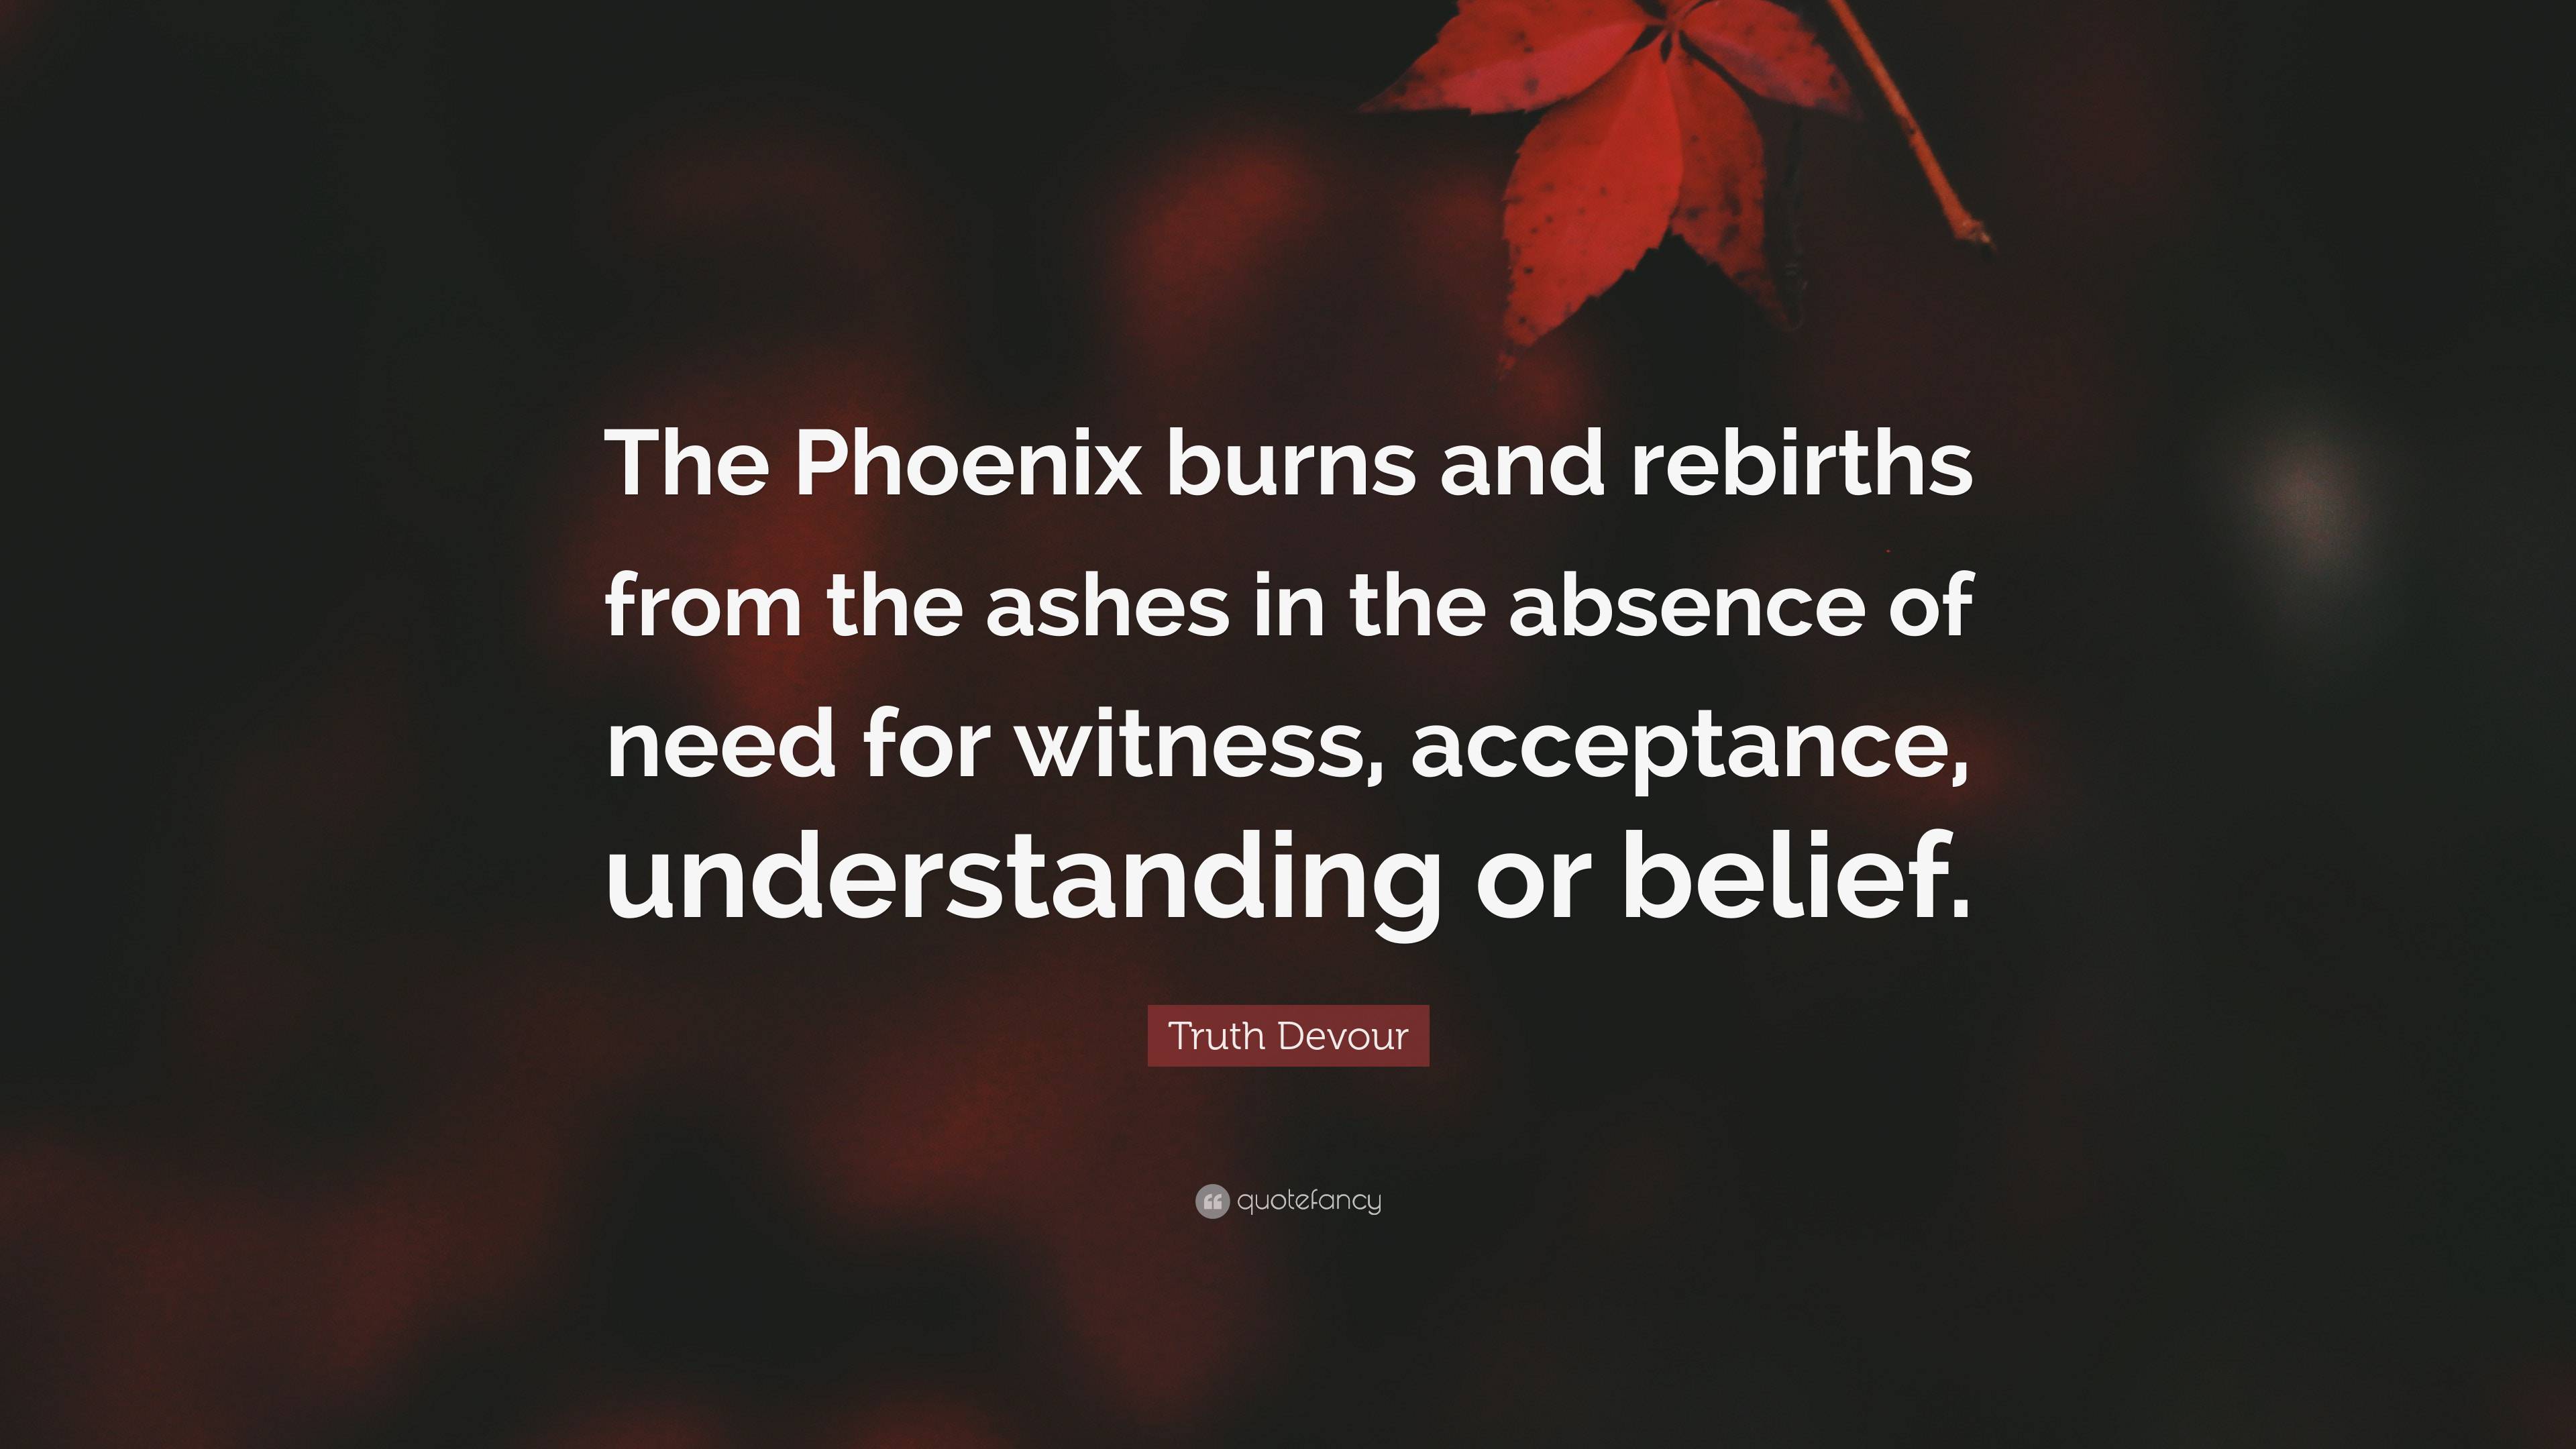 Truth Devour Quote: “The Phoenix burns and rebirths from the ashes in the  absence of need